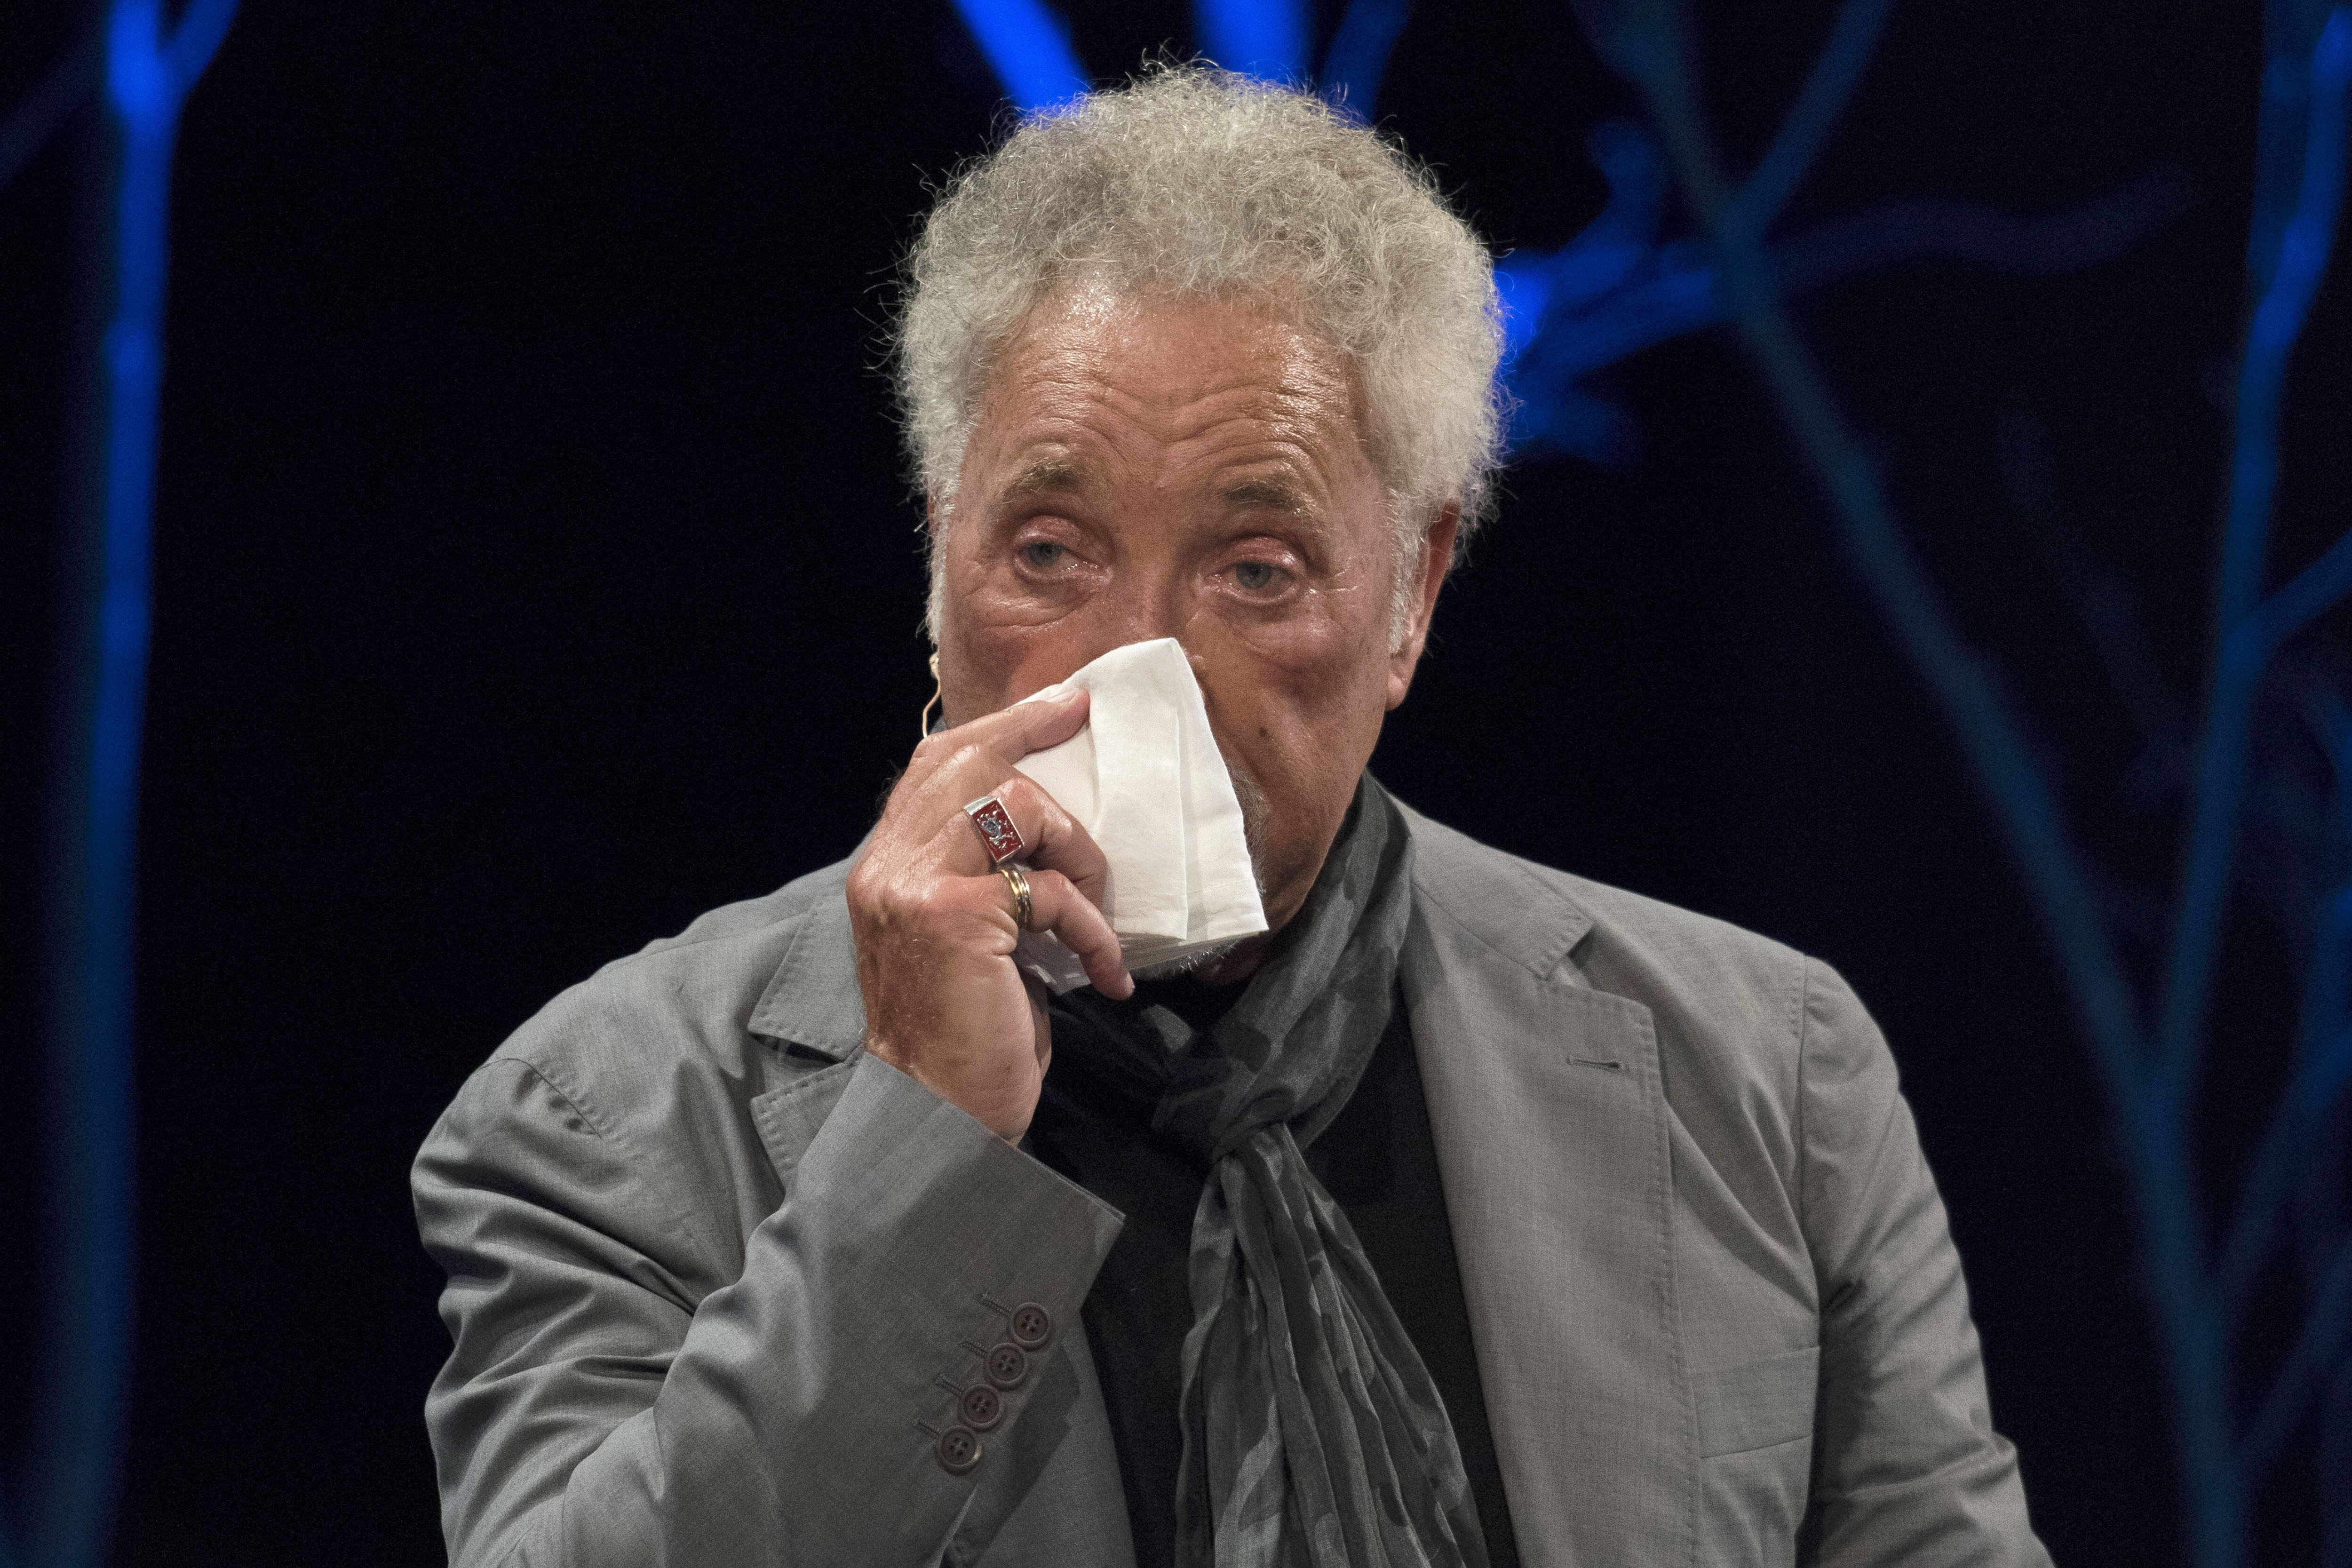 Tom Jones during the 2016 Hay Festival on June 5, 2016 in Hay-on-Wye, Wales. / Source: Getty Images